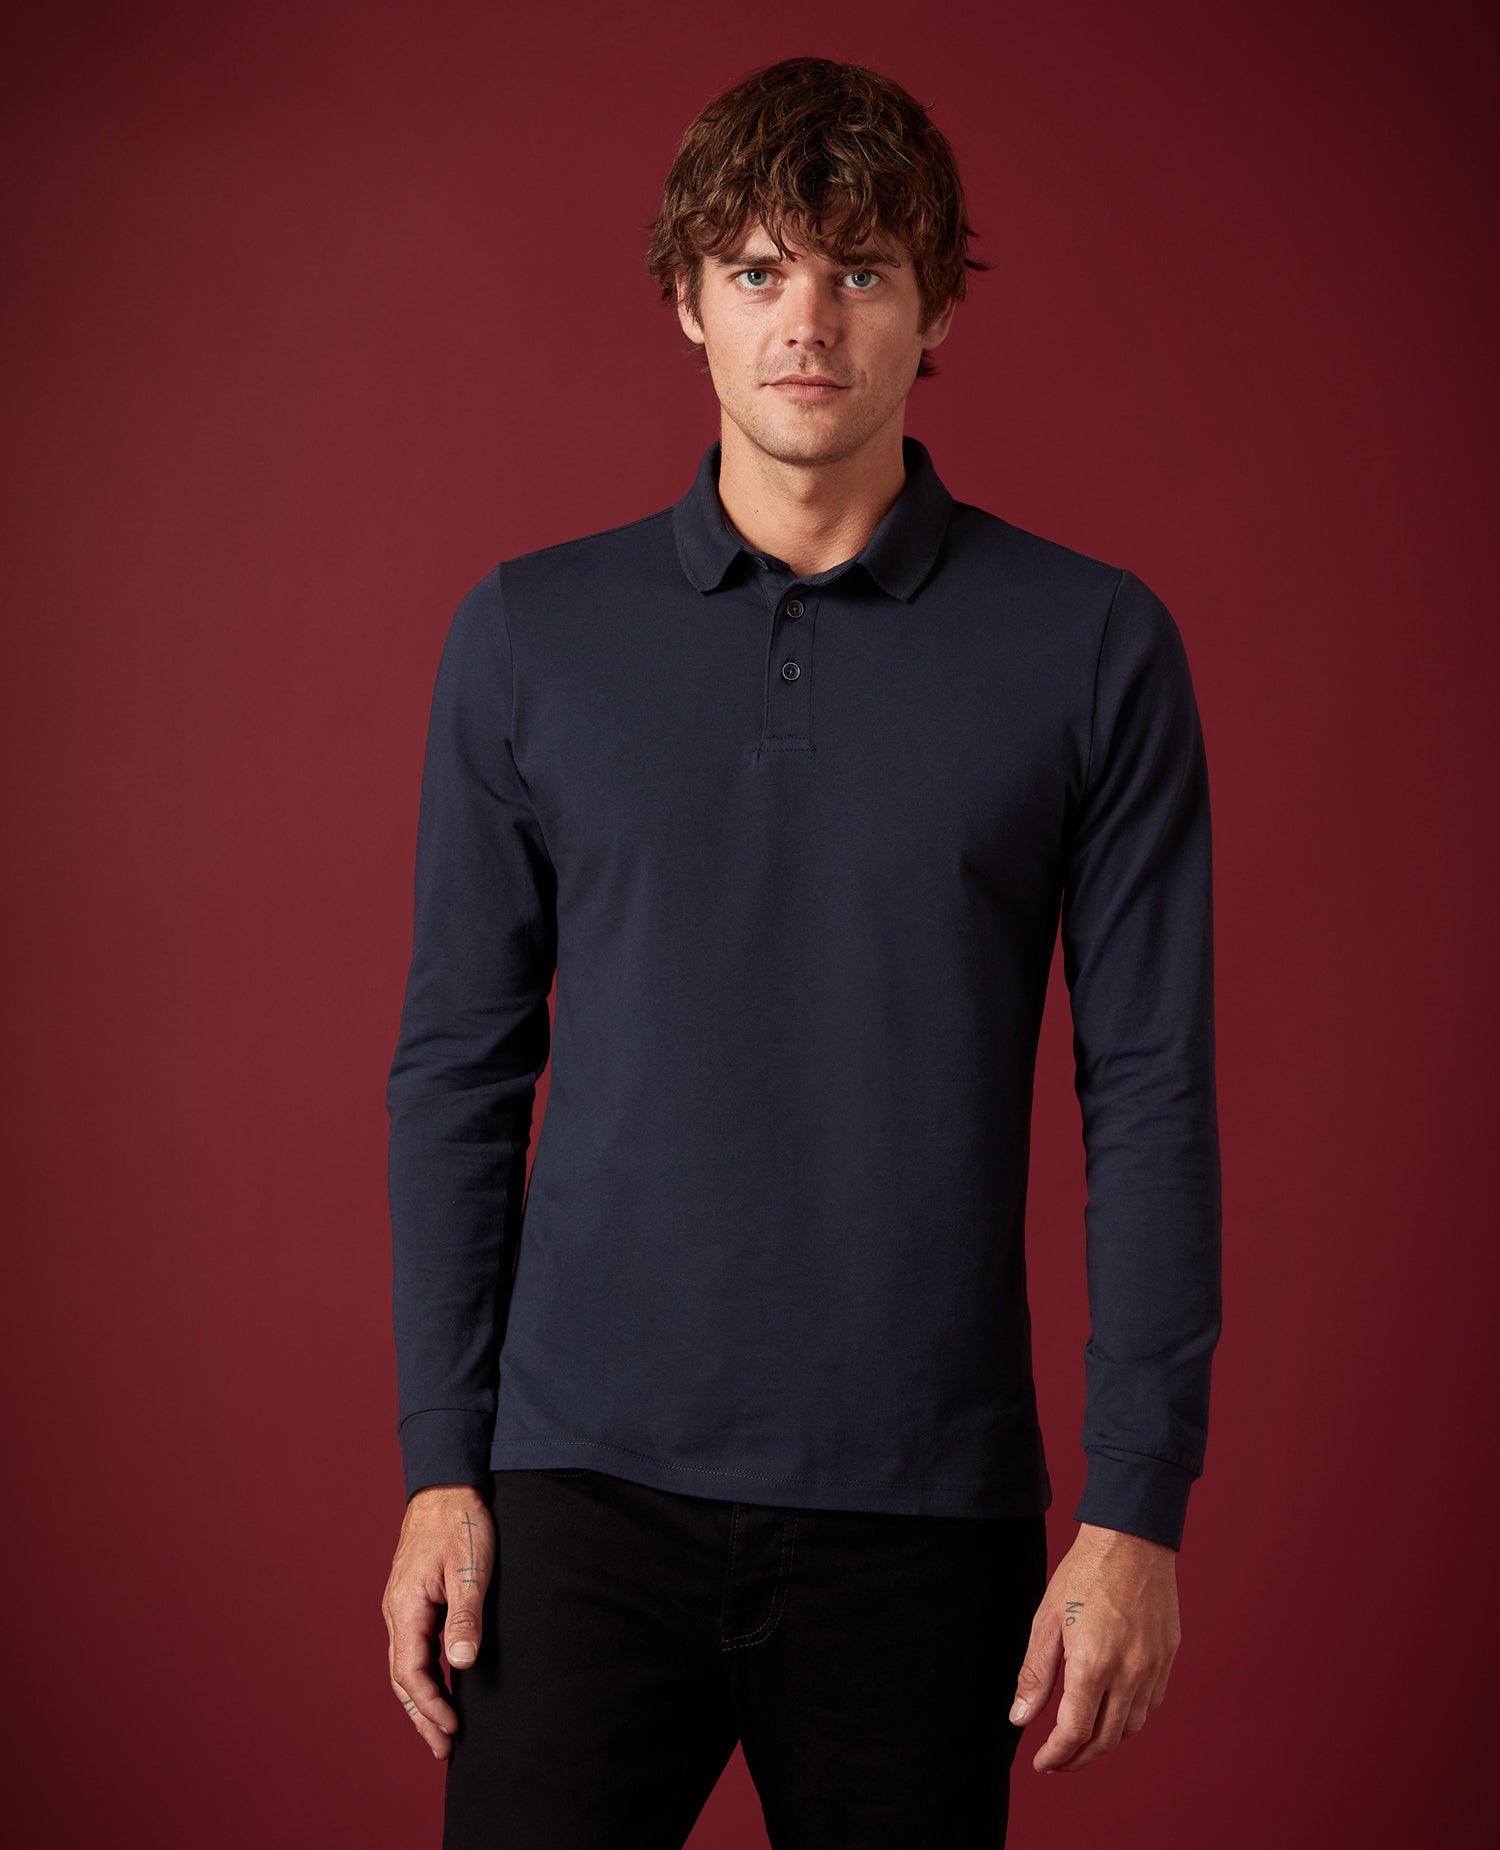 Mens Long Sleeve Navy Polo Stretch Cotton Tops from Remus Uomo, available at StylishGuy Menswear Dublin